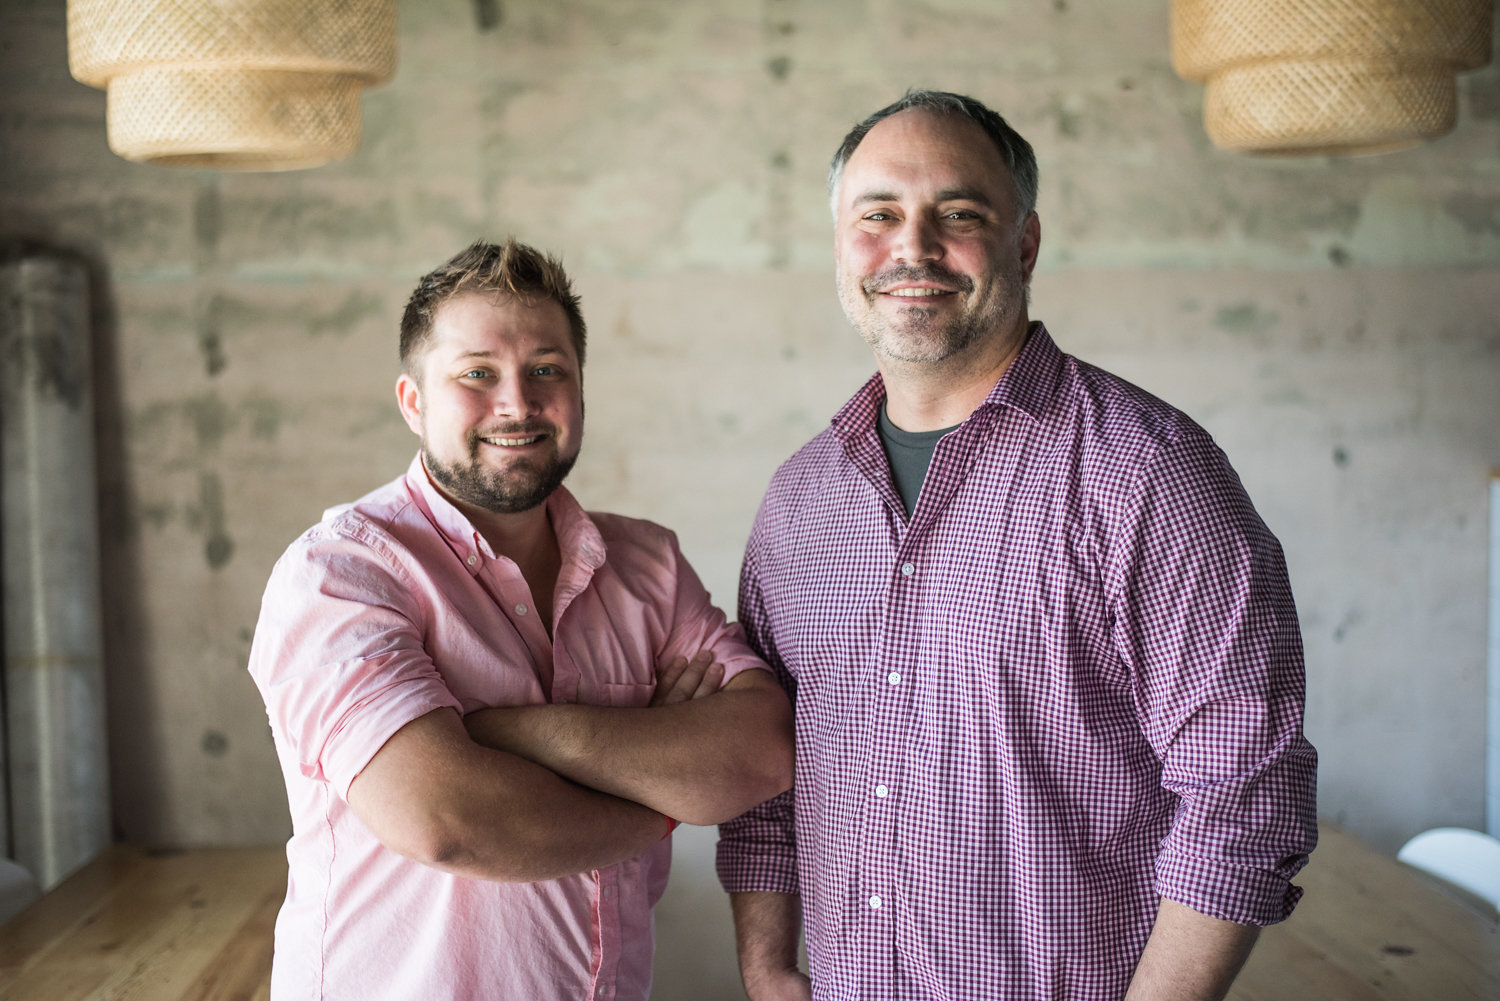 The Bread & Board co-founders Jonathan Cobbs and Dwayne Beliakoff. (Photo provided by Edible)